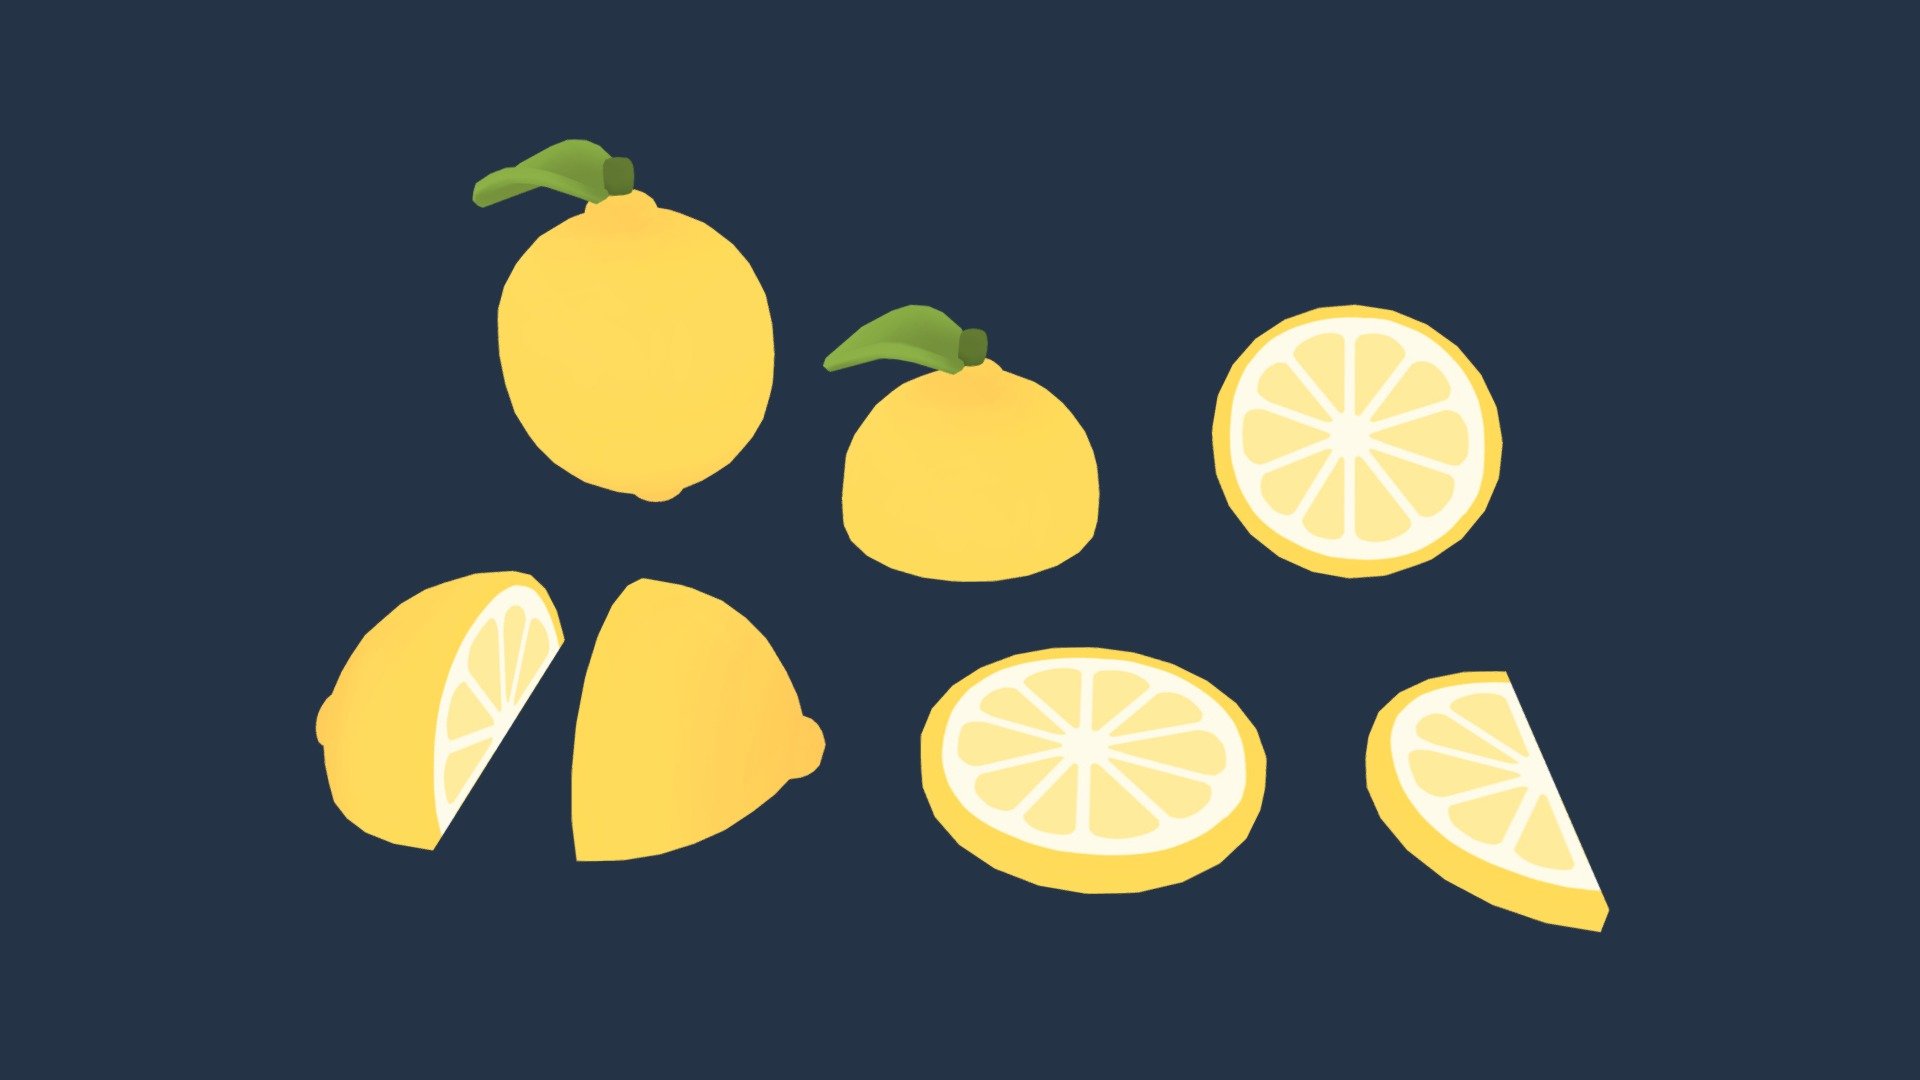 A cute, simple lemon with a colourful, cartoon style 🍋

Part of the Cute Fruits Pack! See the full model pack here 👑✨

Includes:

1 whole lemon mesh

2 half lemon meshes

2 quarter lemon meshes

2 lemon slice meshes

2 texture .pngs

Zip file contains the models as an .fbx file - Cute Lemon - Buy Royalty Free 3D model by pixelatedcrown 3d model